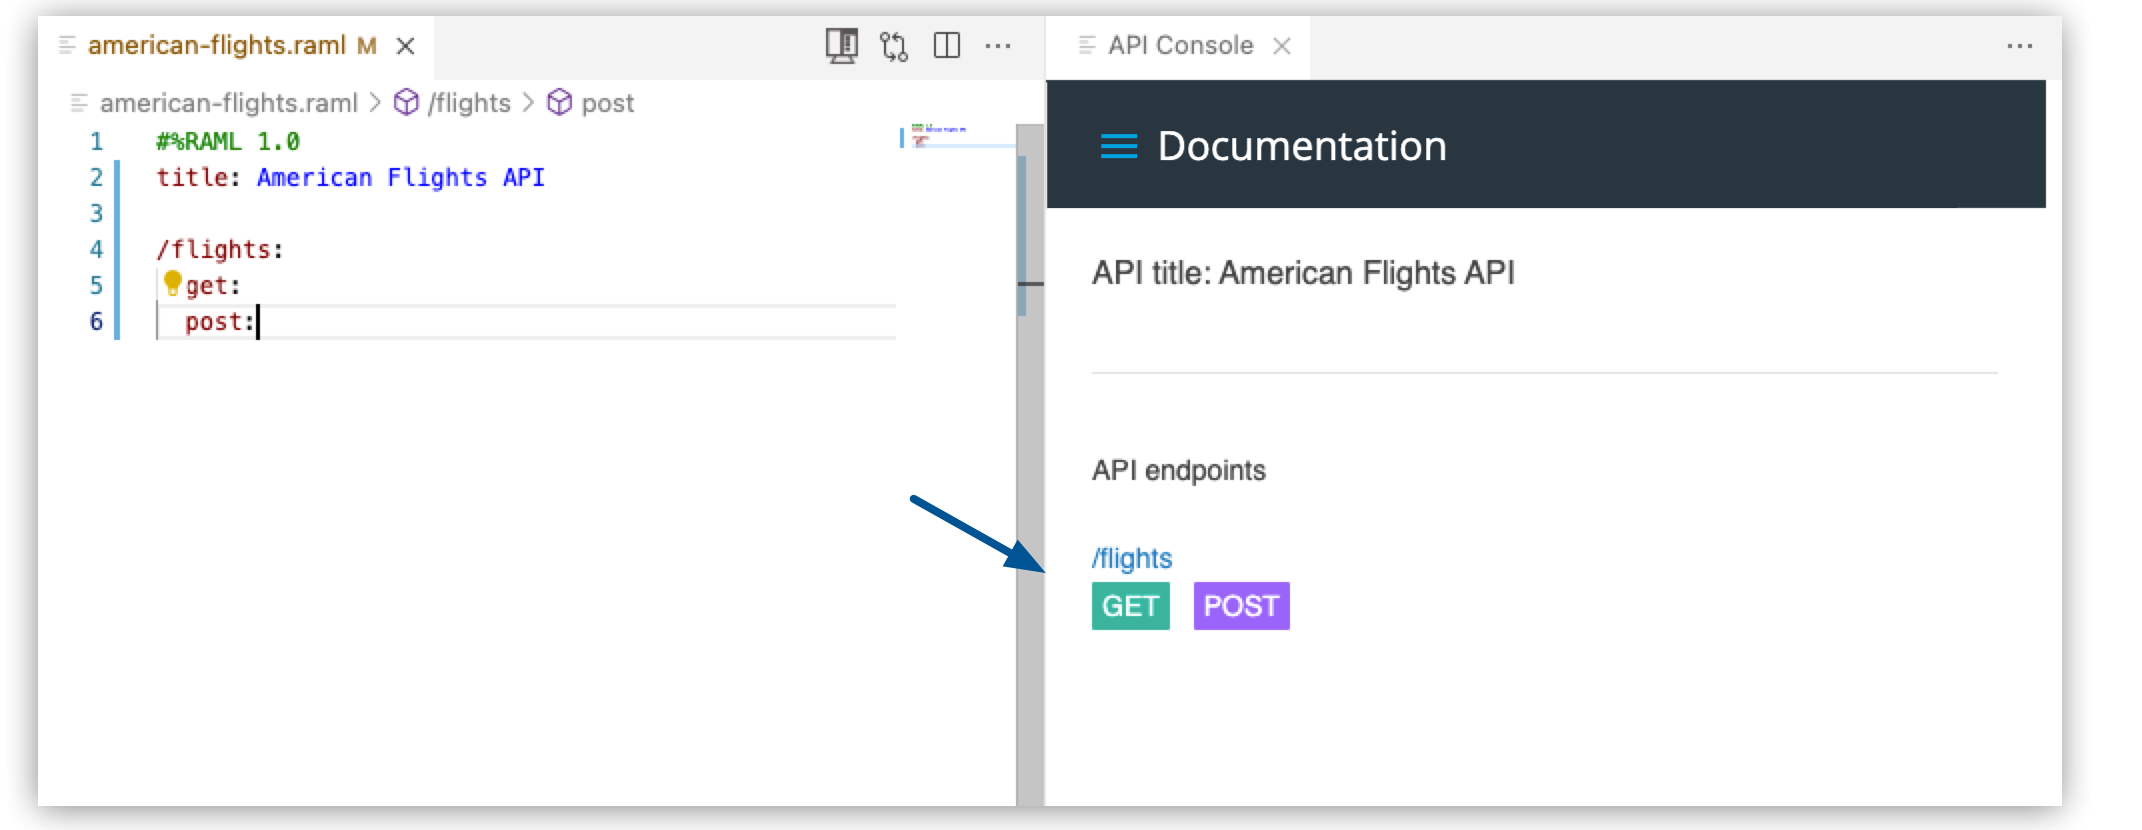 GET and POST methods highlighted in *API Console*